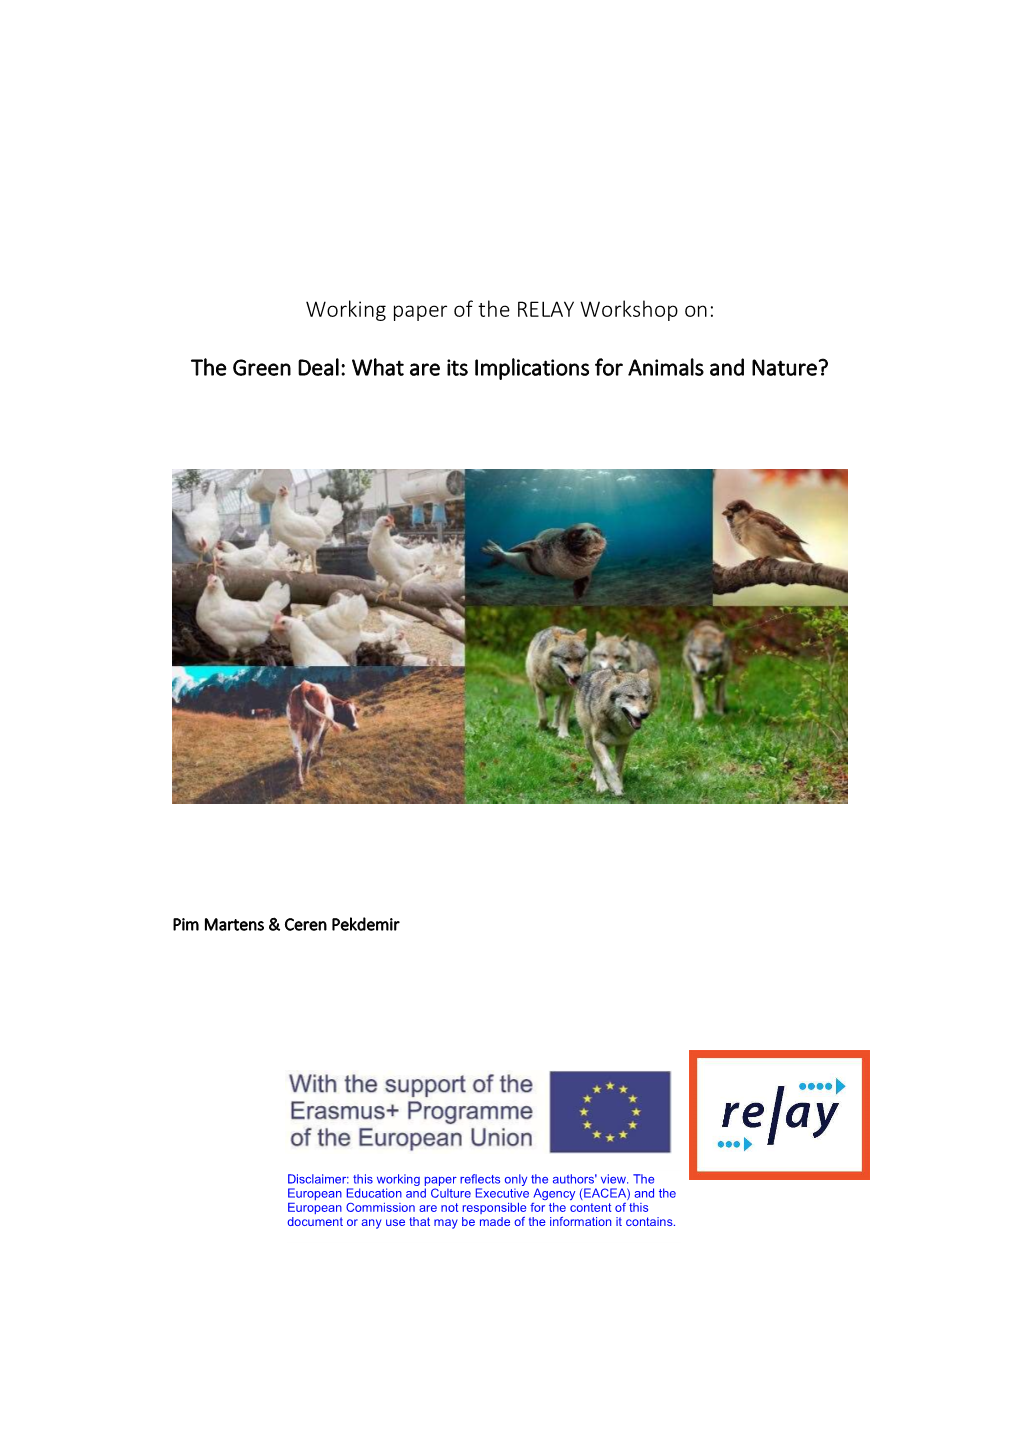 The European Green Deal and Its Implications for Animals and Nature